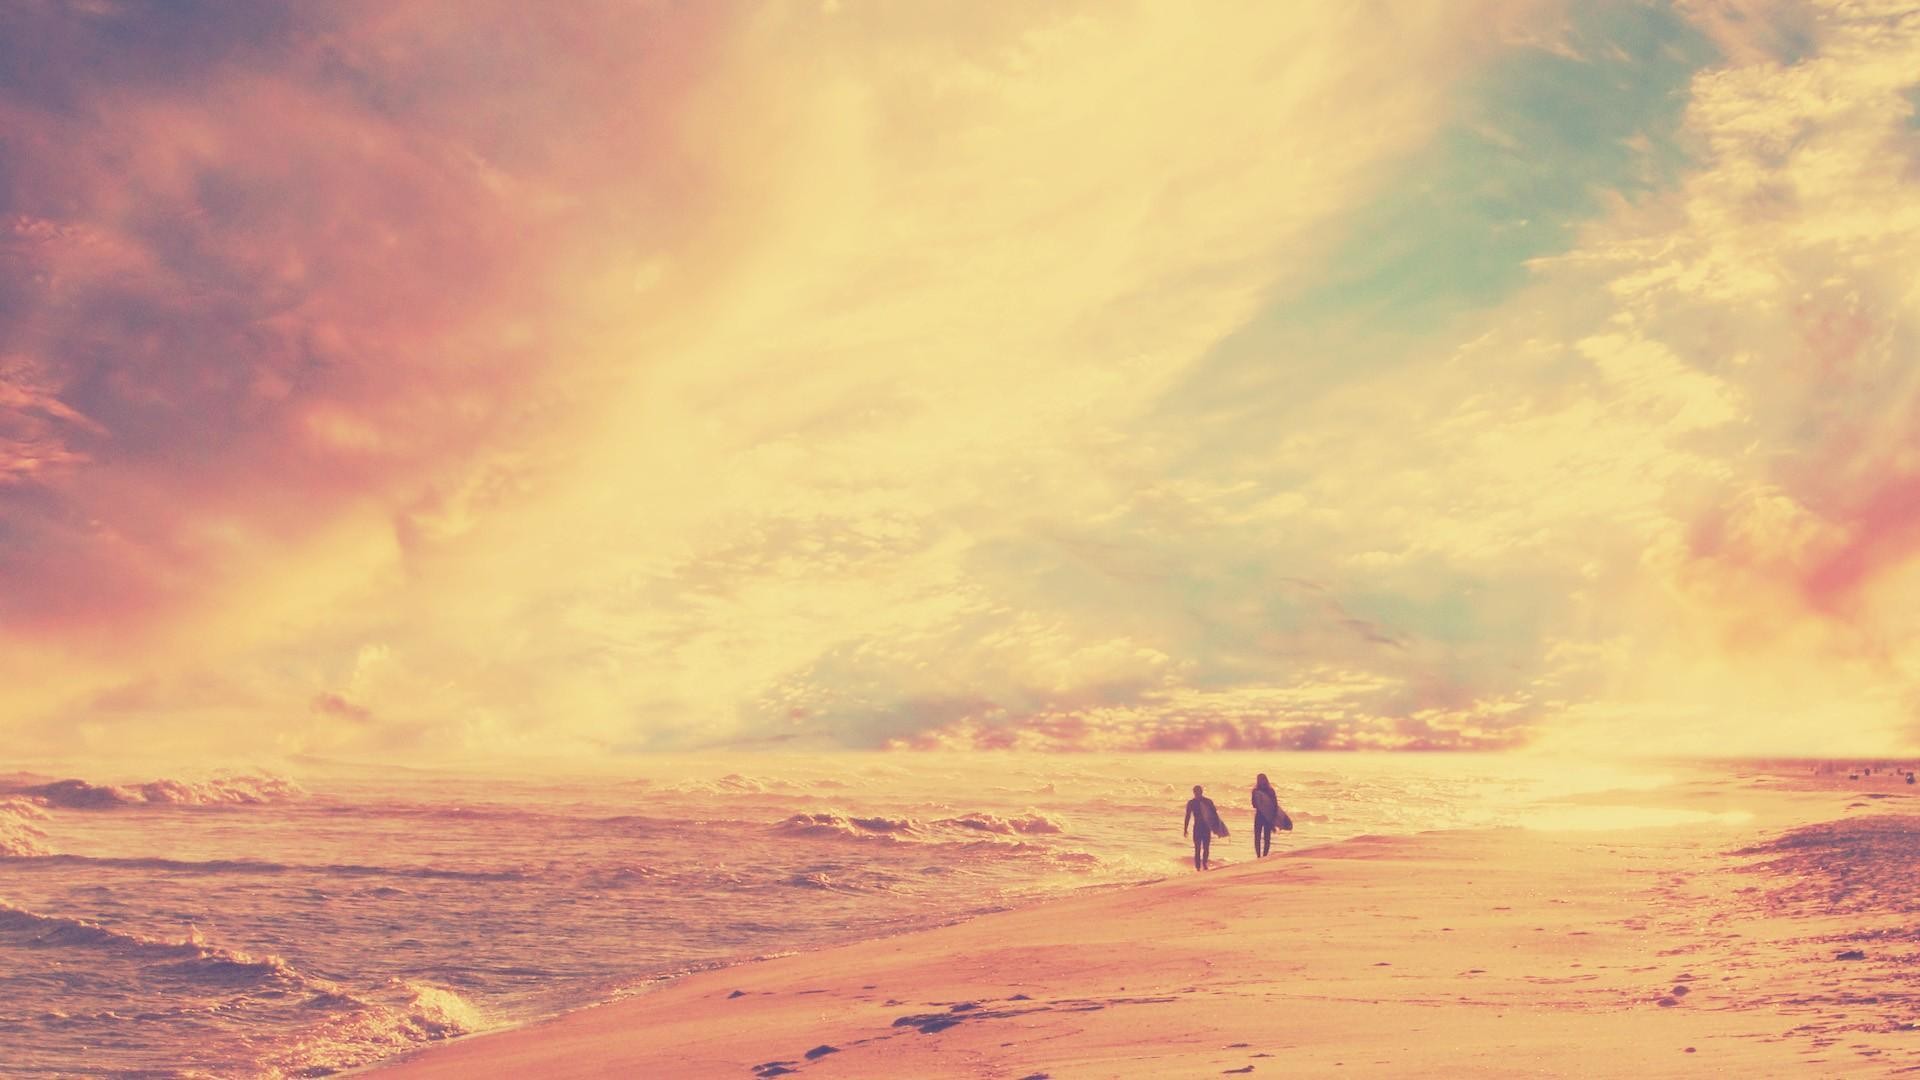 Wallpapers For > Tumblr Backgrounds Beach Surf